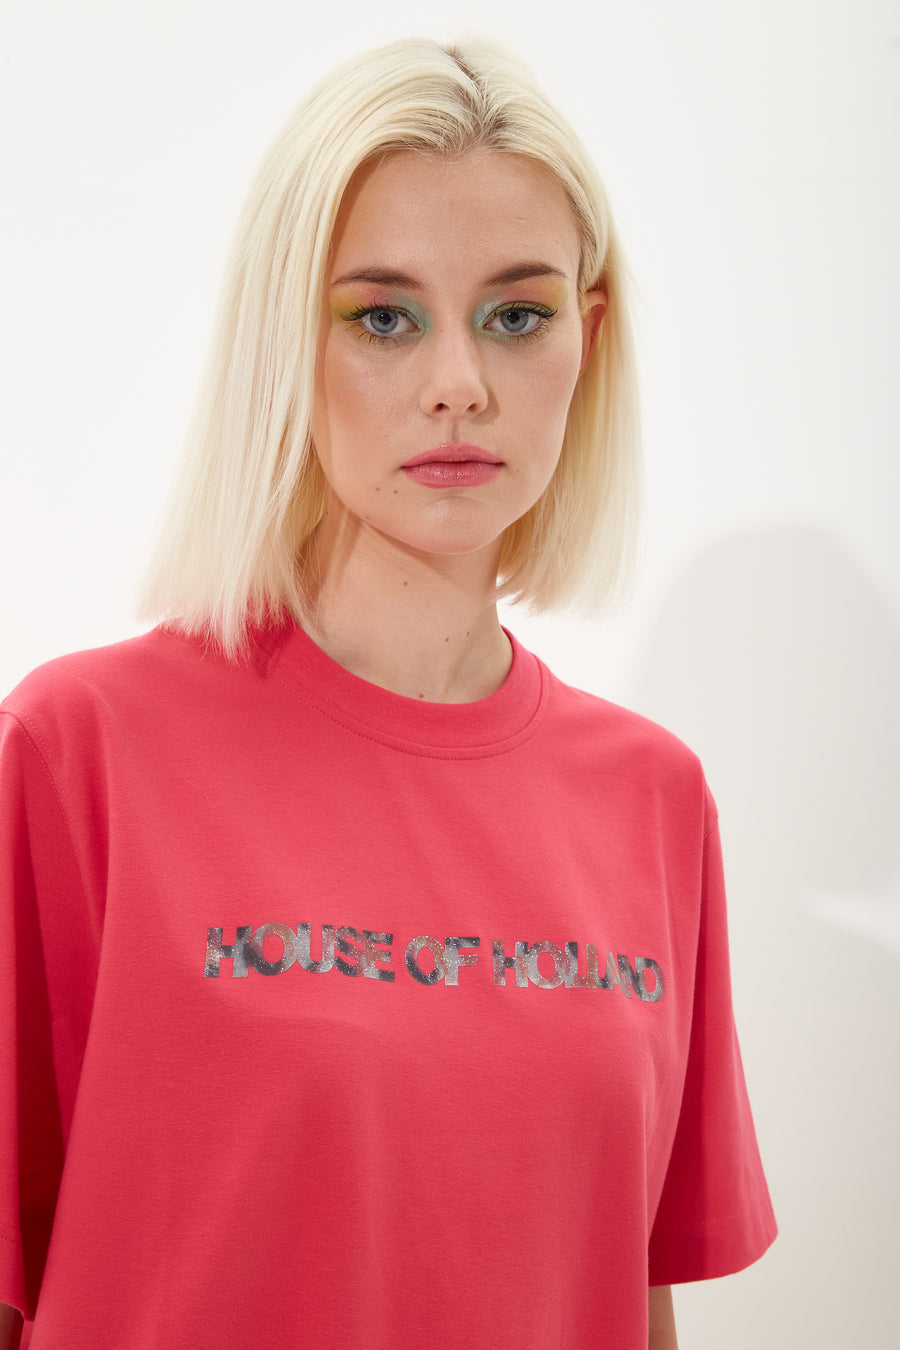 House of Holland Hot Pink Transfer Printed T-Shirt